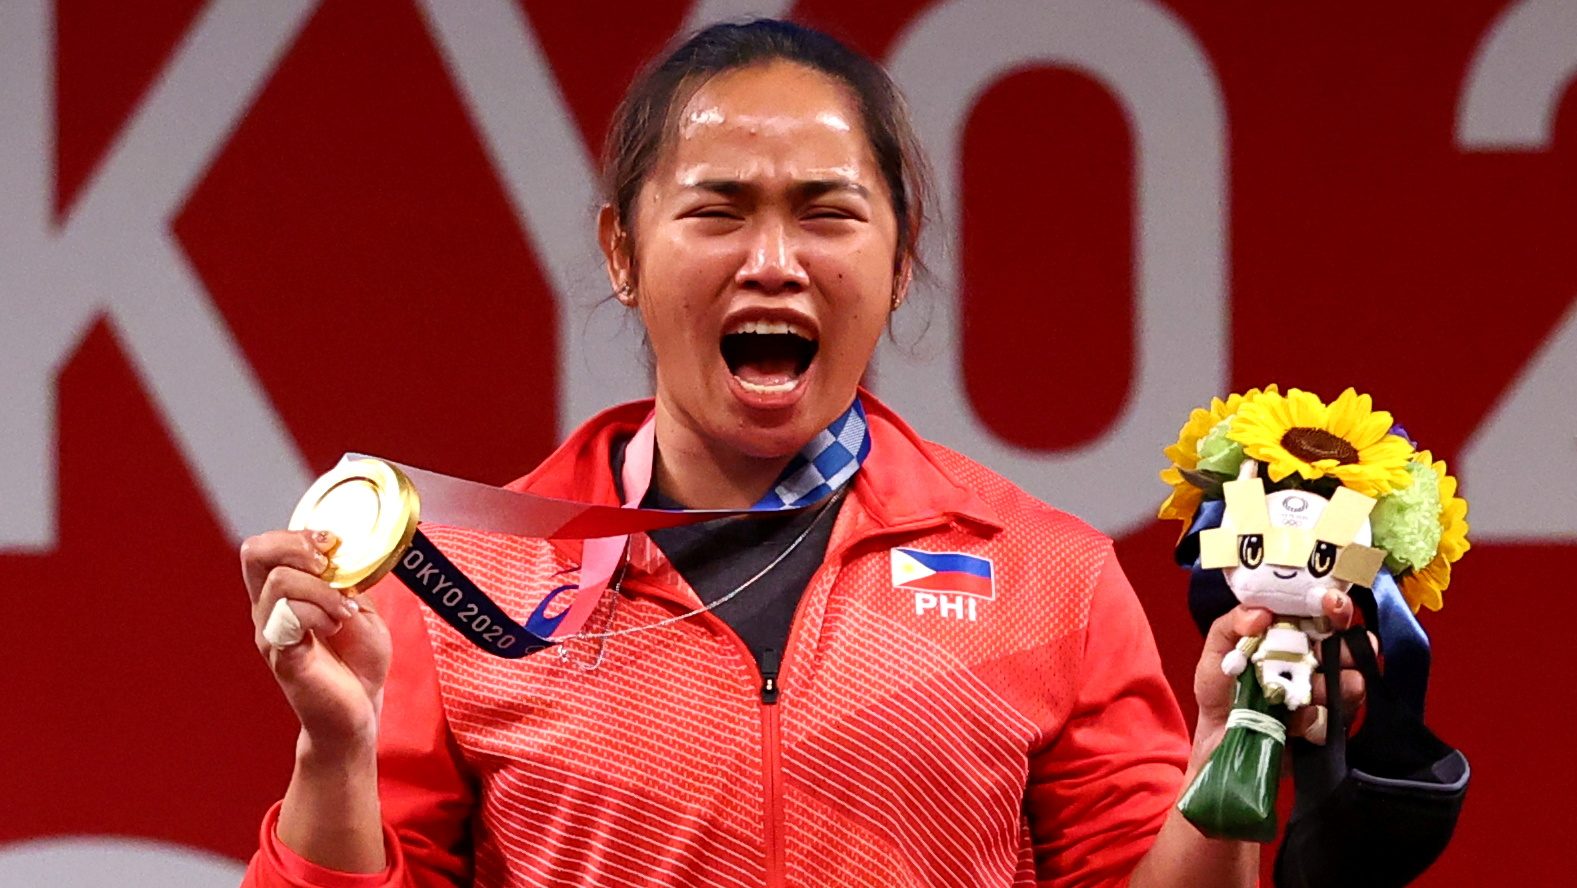 Hidilyn Diaz to receive P33 million for historic Olympic gold